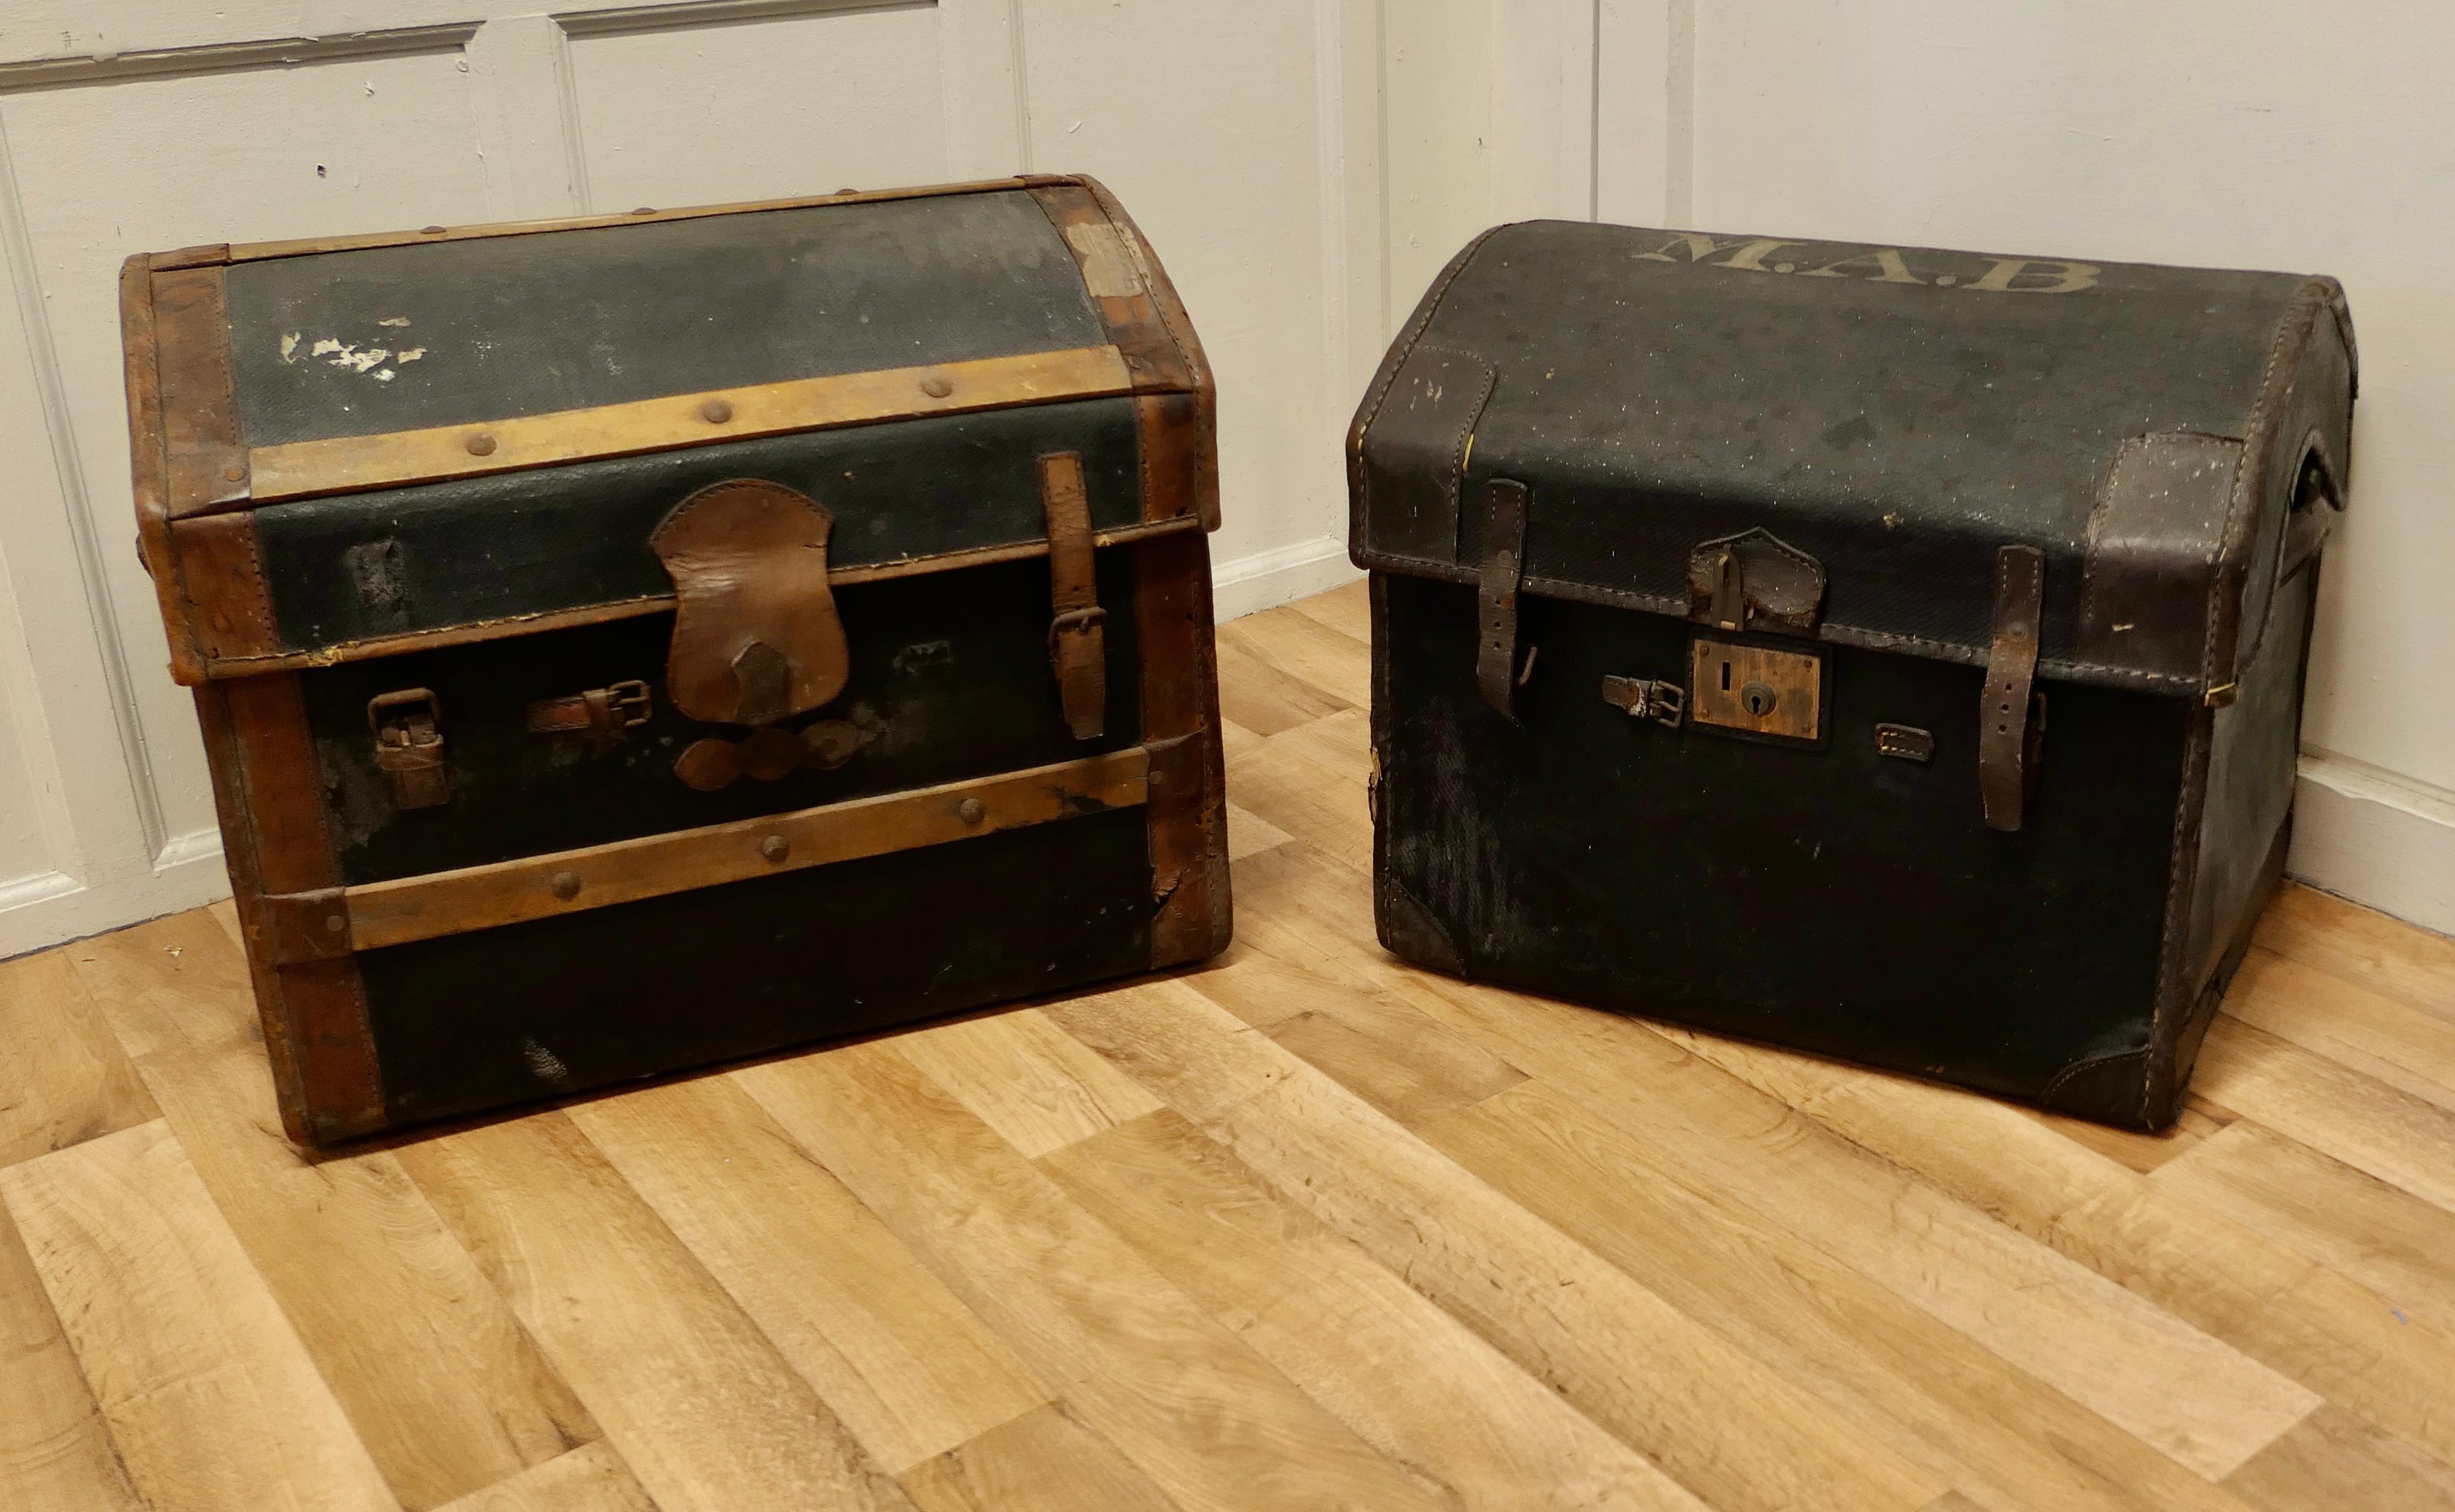 A pair of Victorian canvas and leather dome top travel trunks

The trunks are both lined and made in wicker they are covered with canvas and leather. Both trunks have a dome top shape, leather carrying handles and are stamped with the initials of